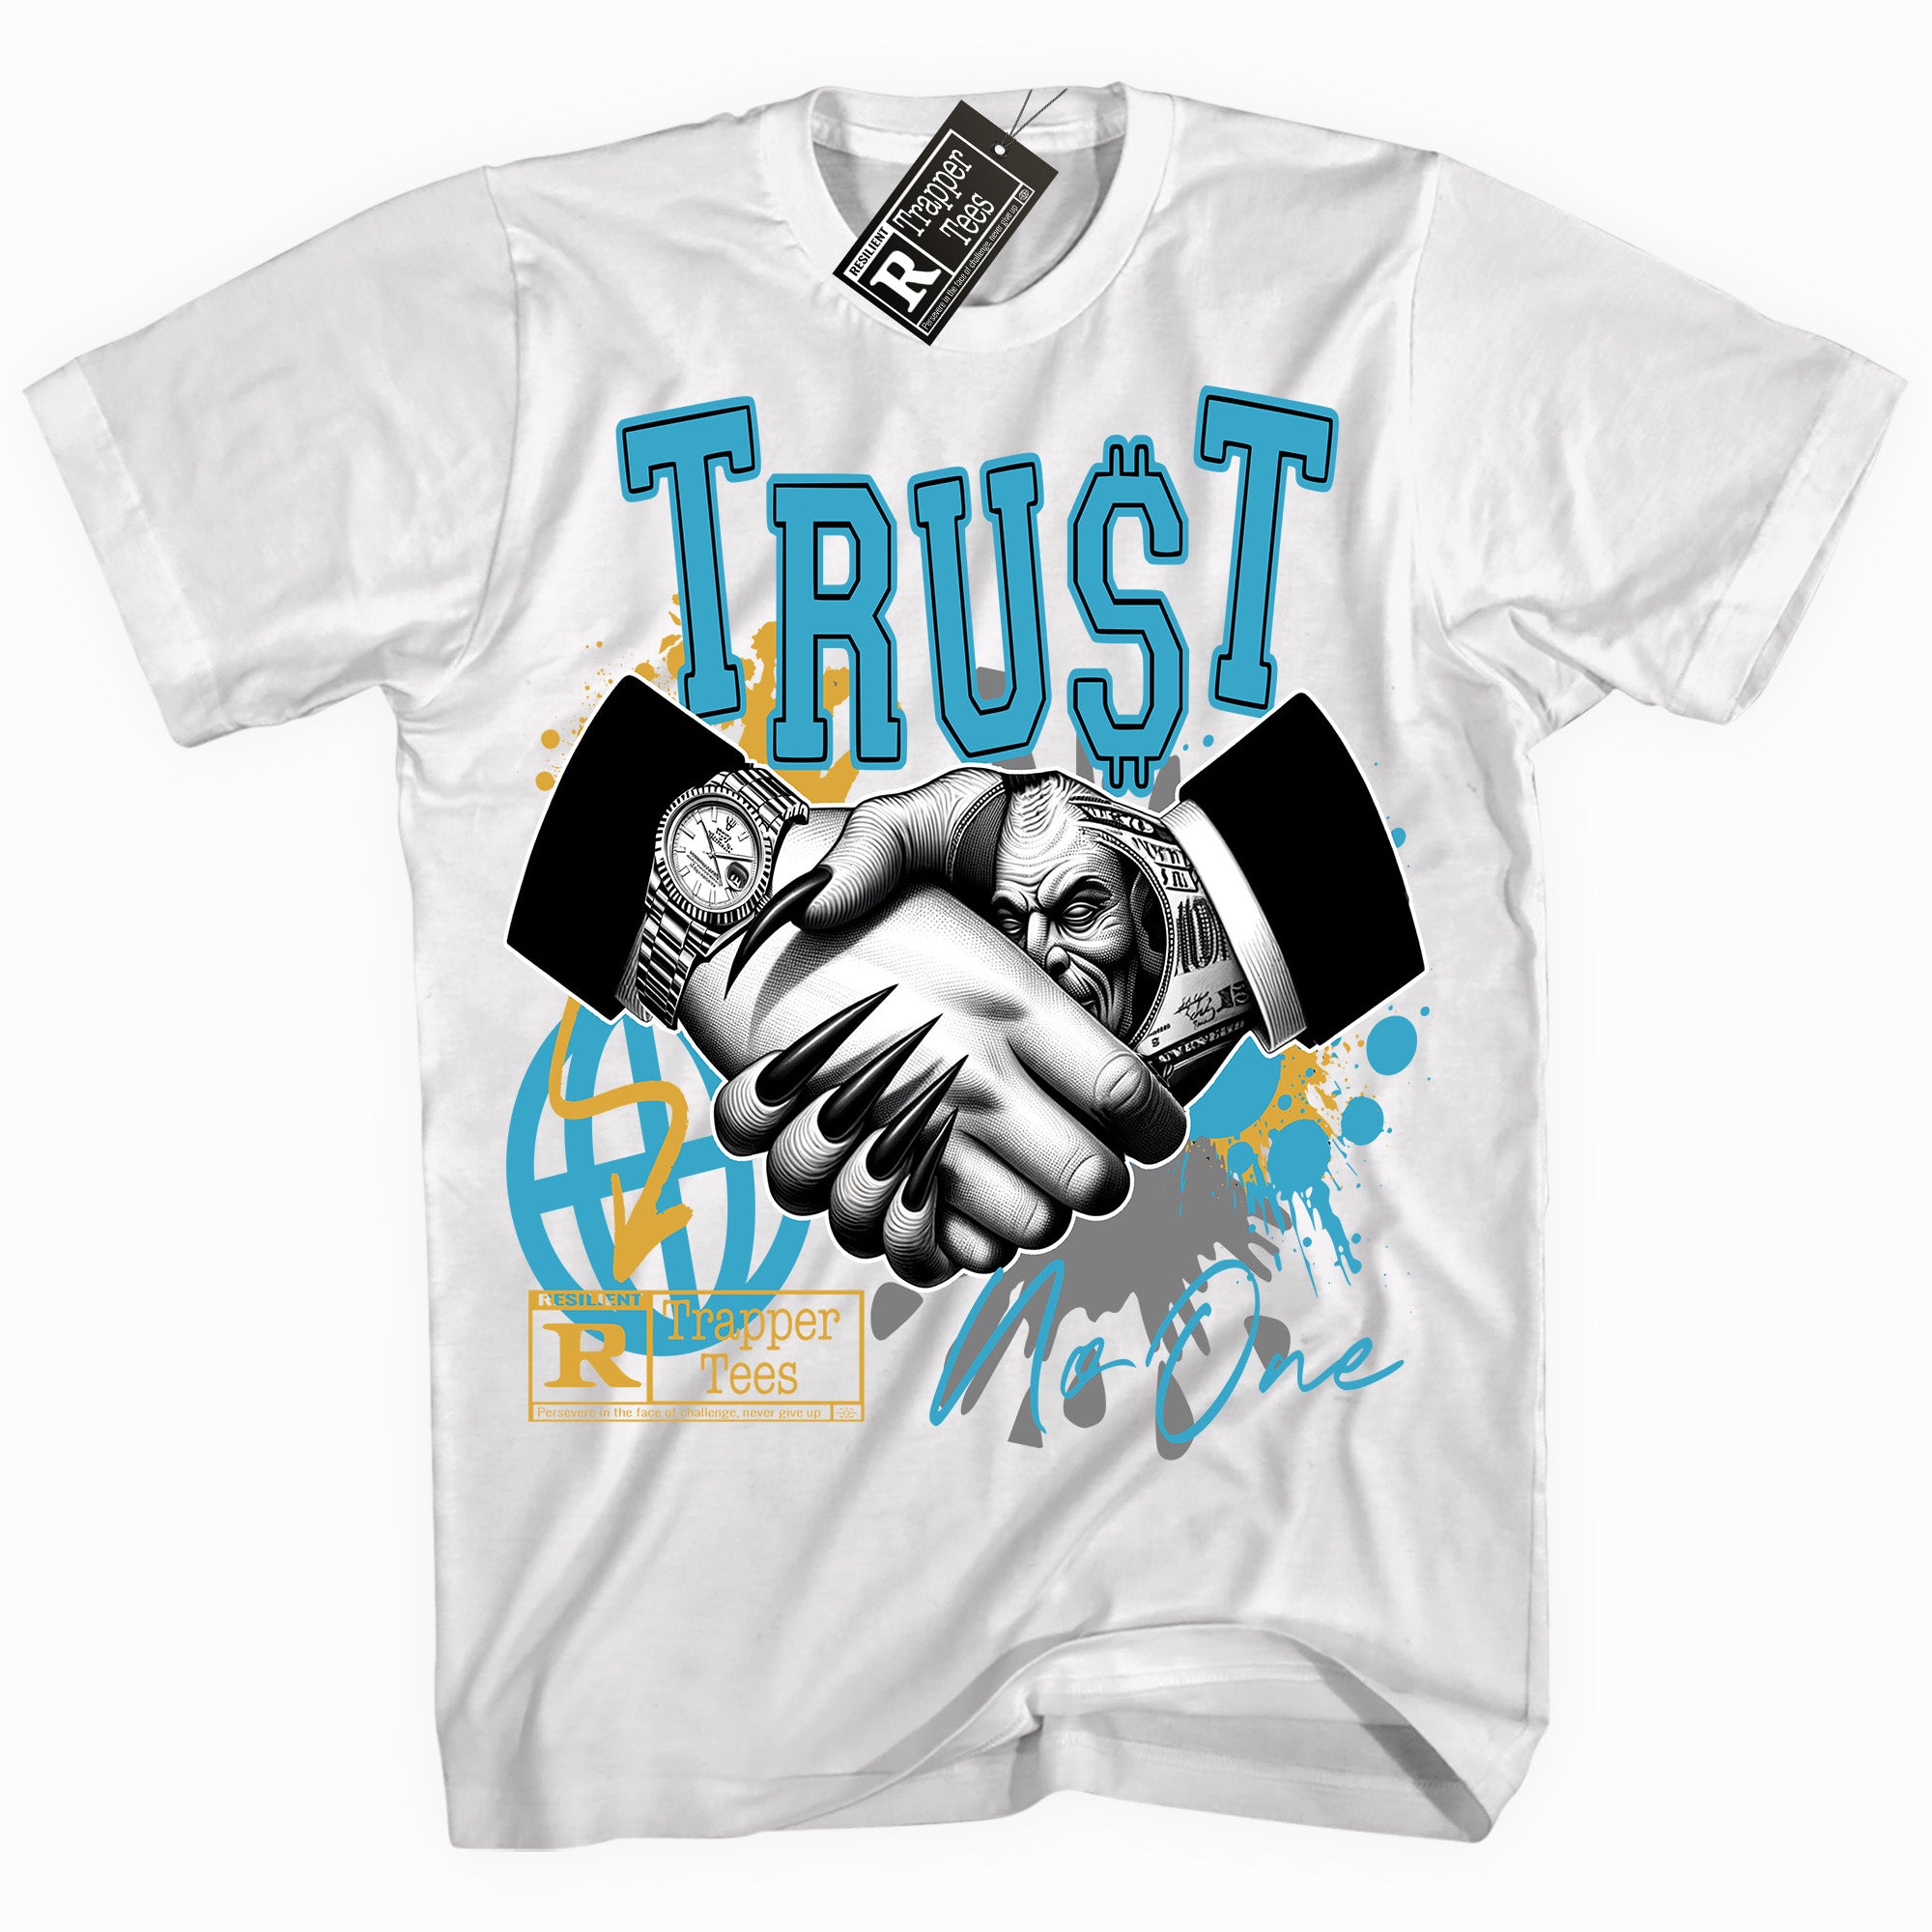 Cool White graphic tee with “ Trapped ” print, that perfectly matches Aqua 5s sneakers